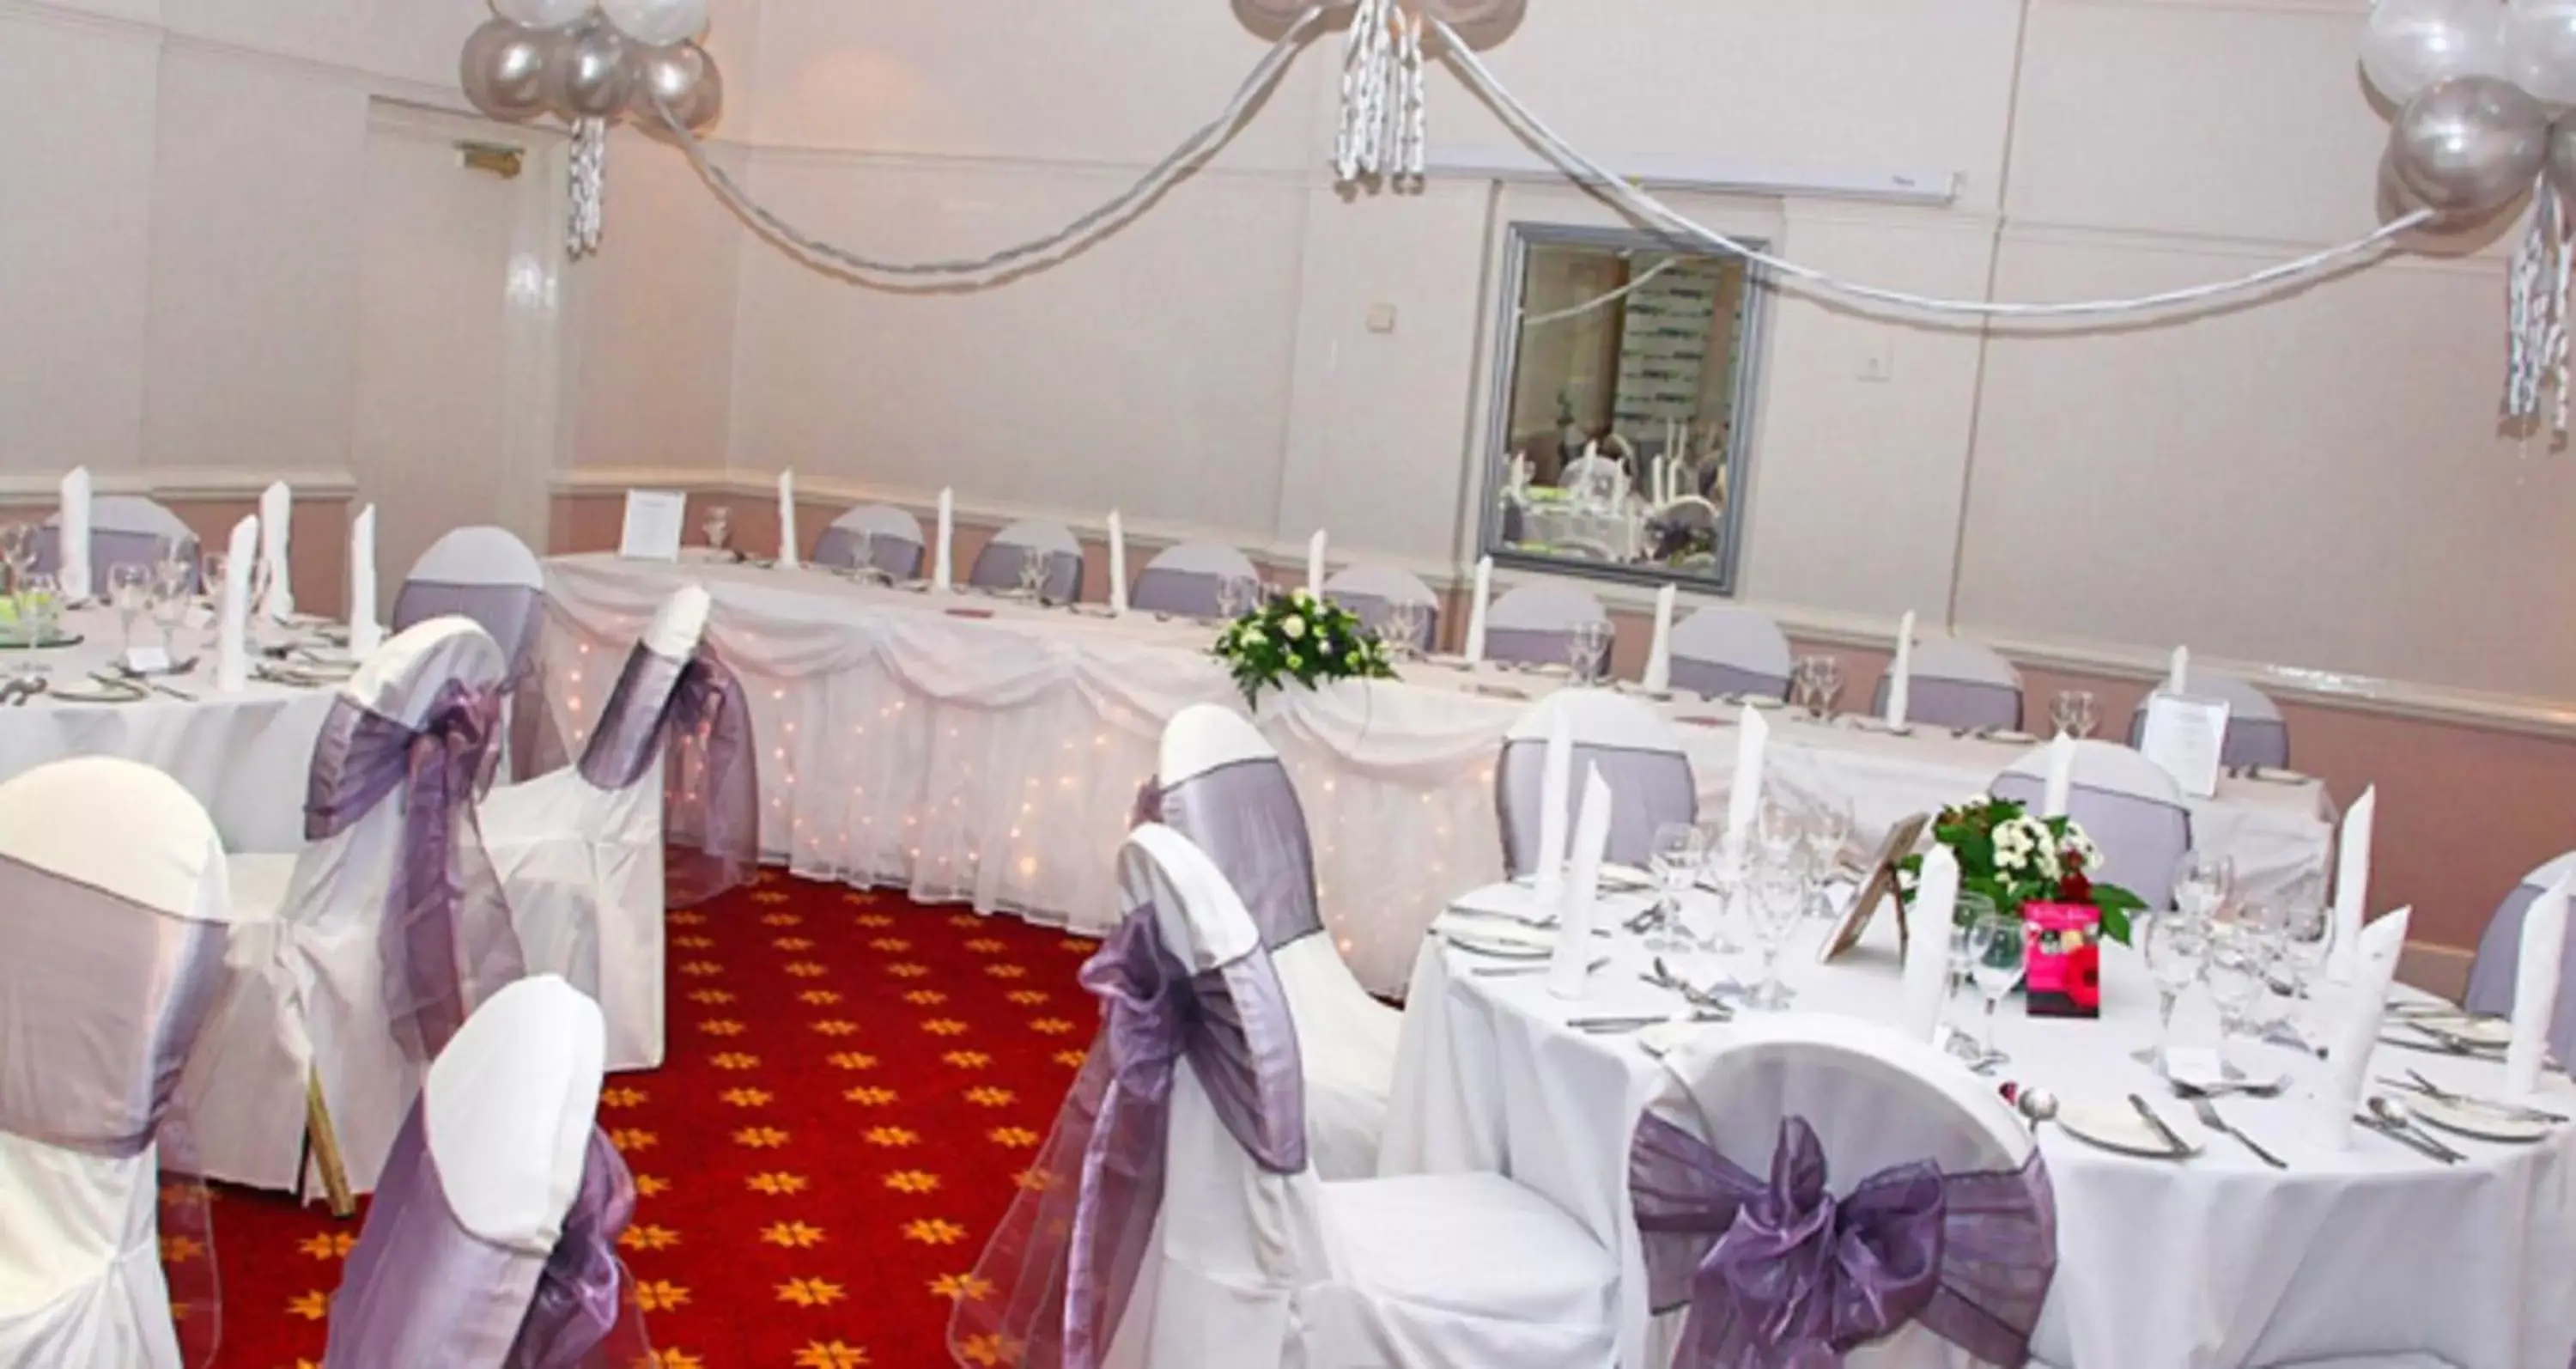 Banquet/Function facilities, Banquet Facilities in Bromsgrove Hotel and Spa